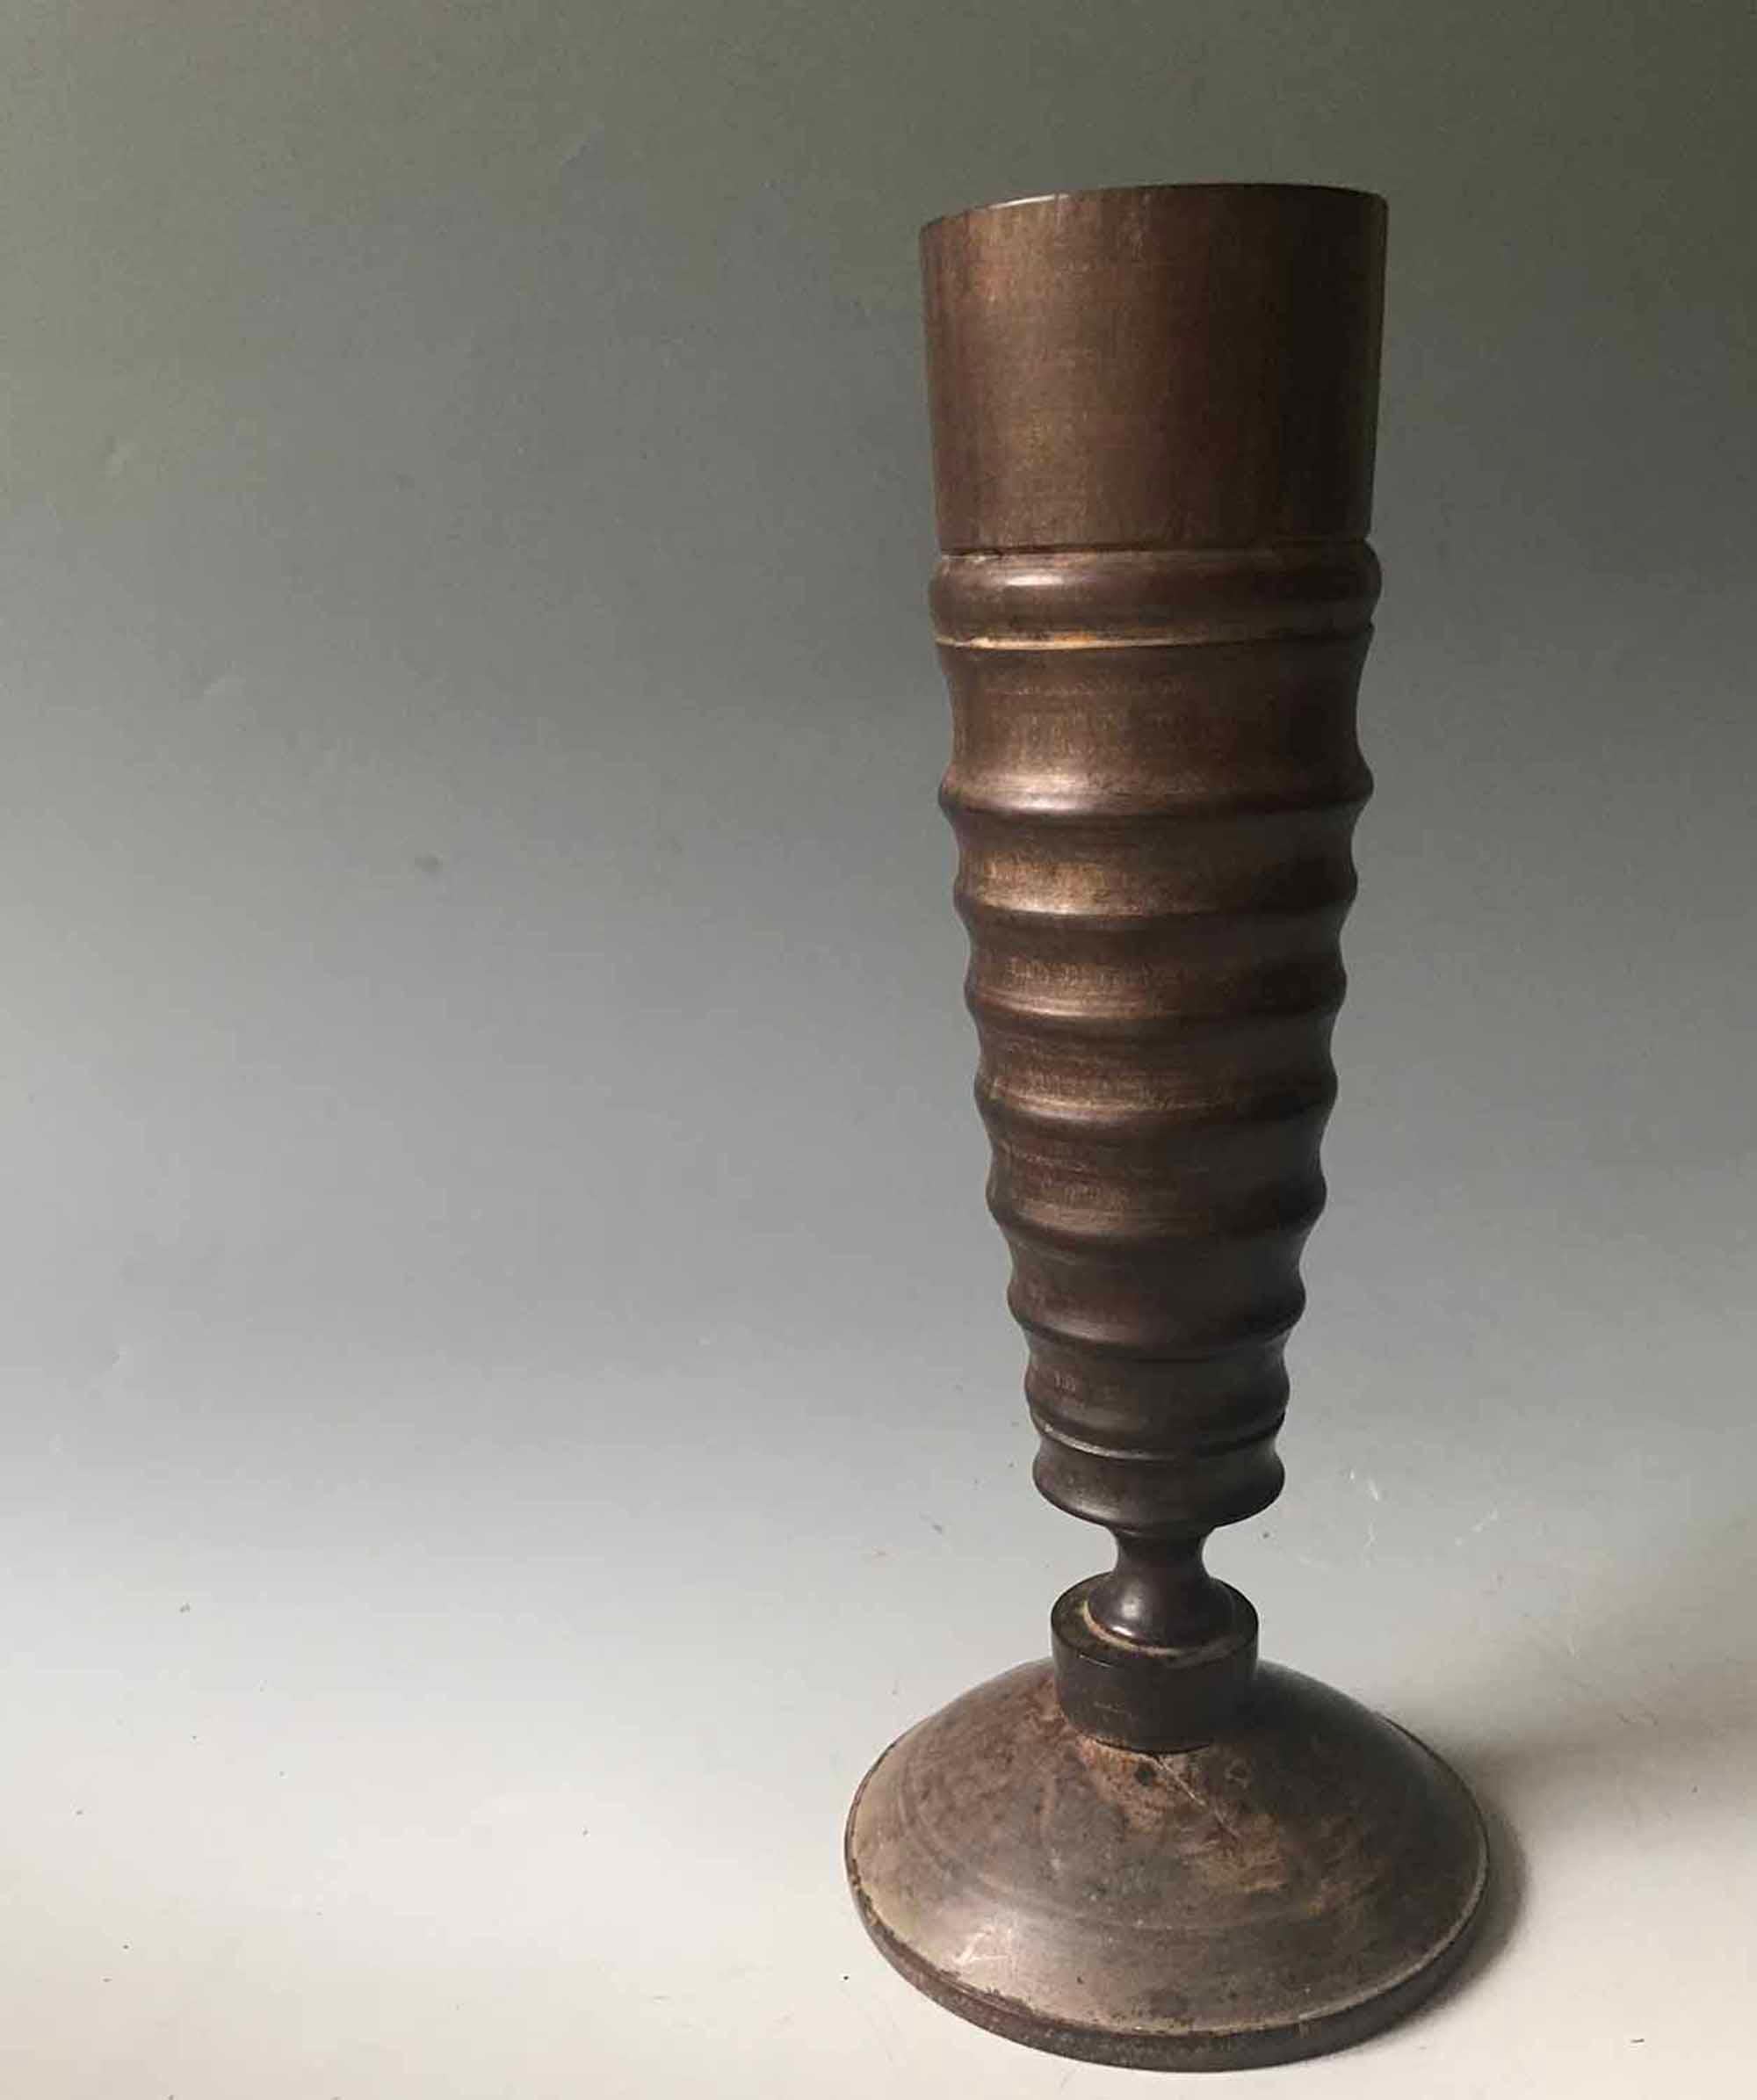 Antique English Georgian turned wood Goblet Circa 1790.

A elegant English Georgian tall turned wood goblet in Laburnum wood

Very good condition,

Measures: height 26 cm.